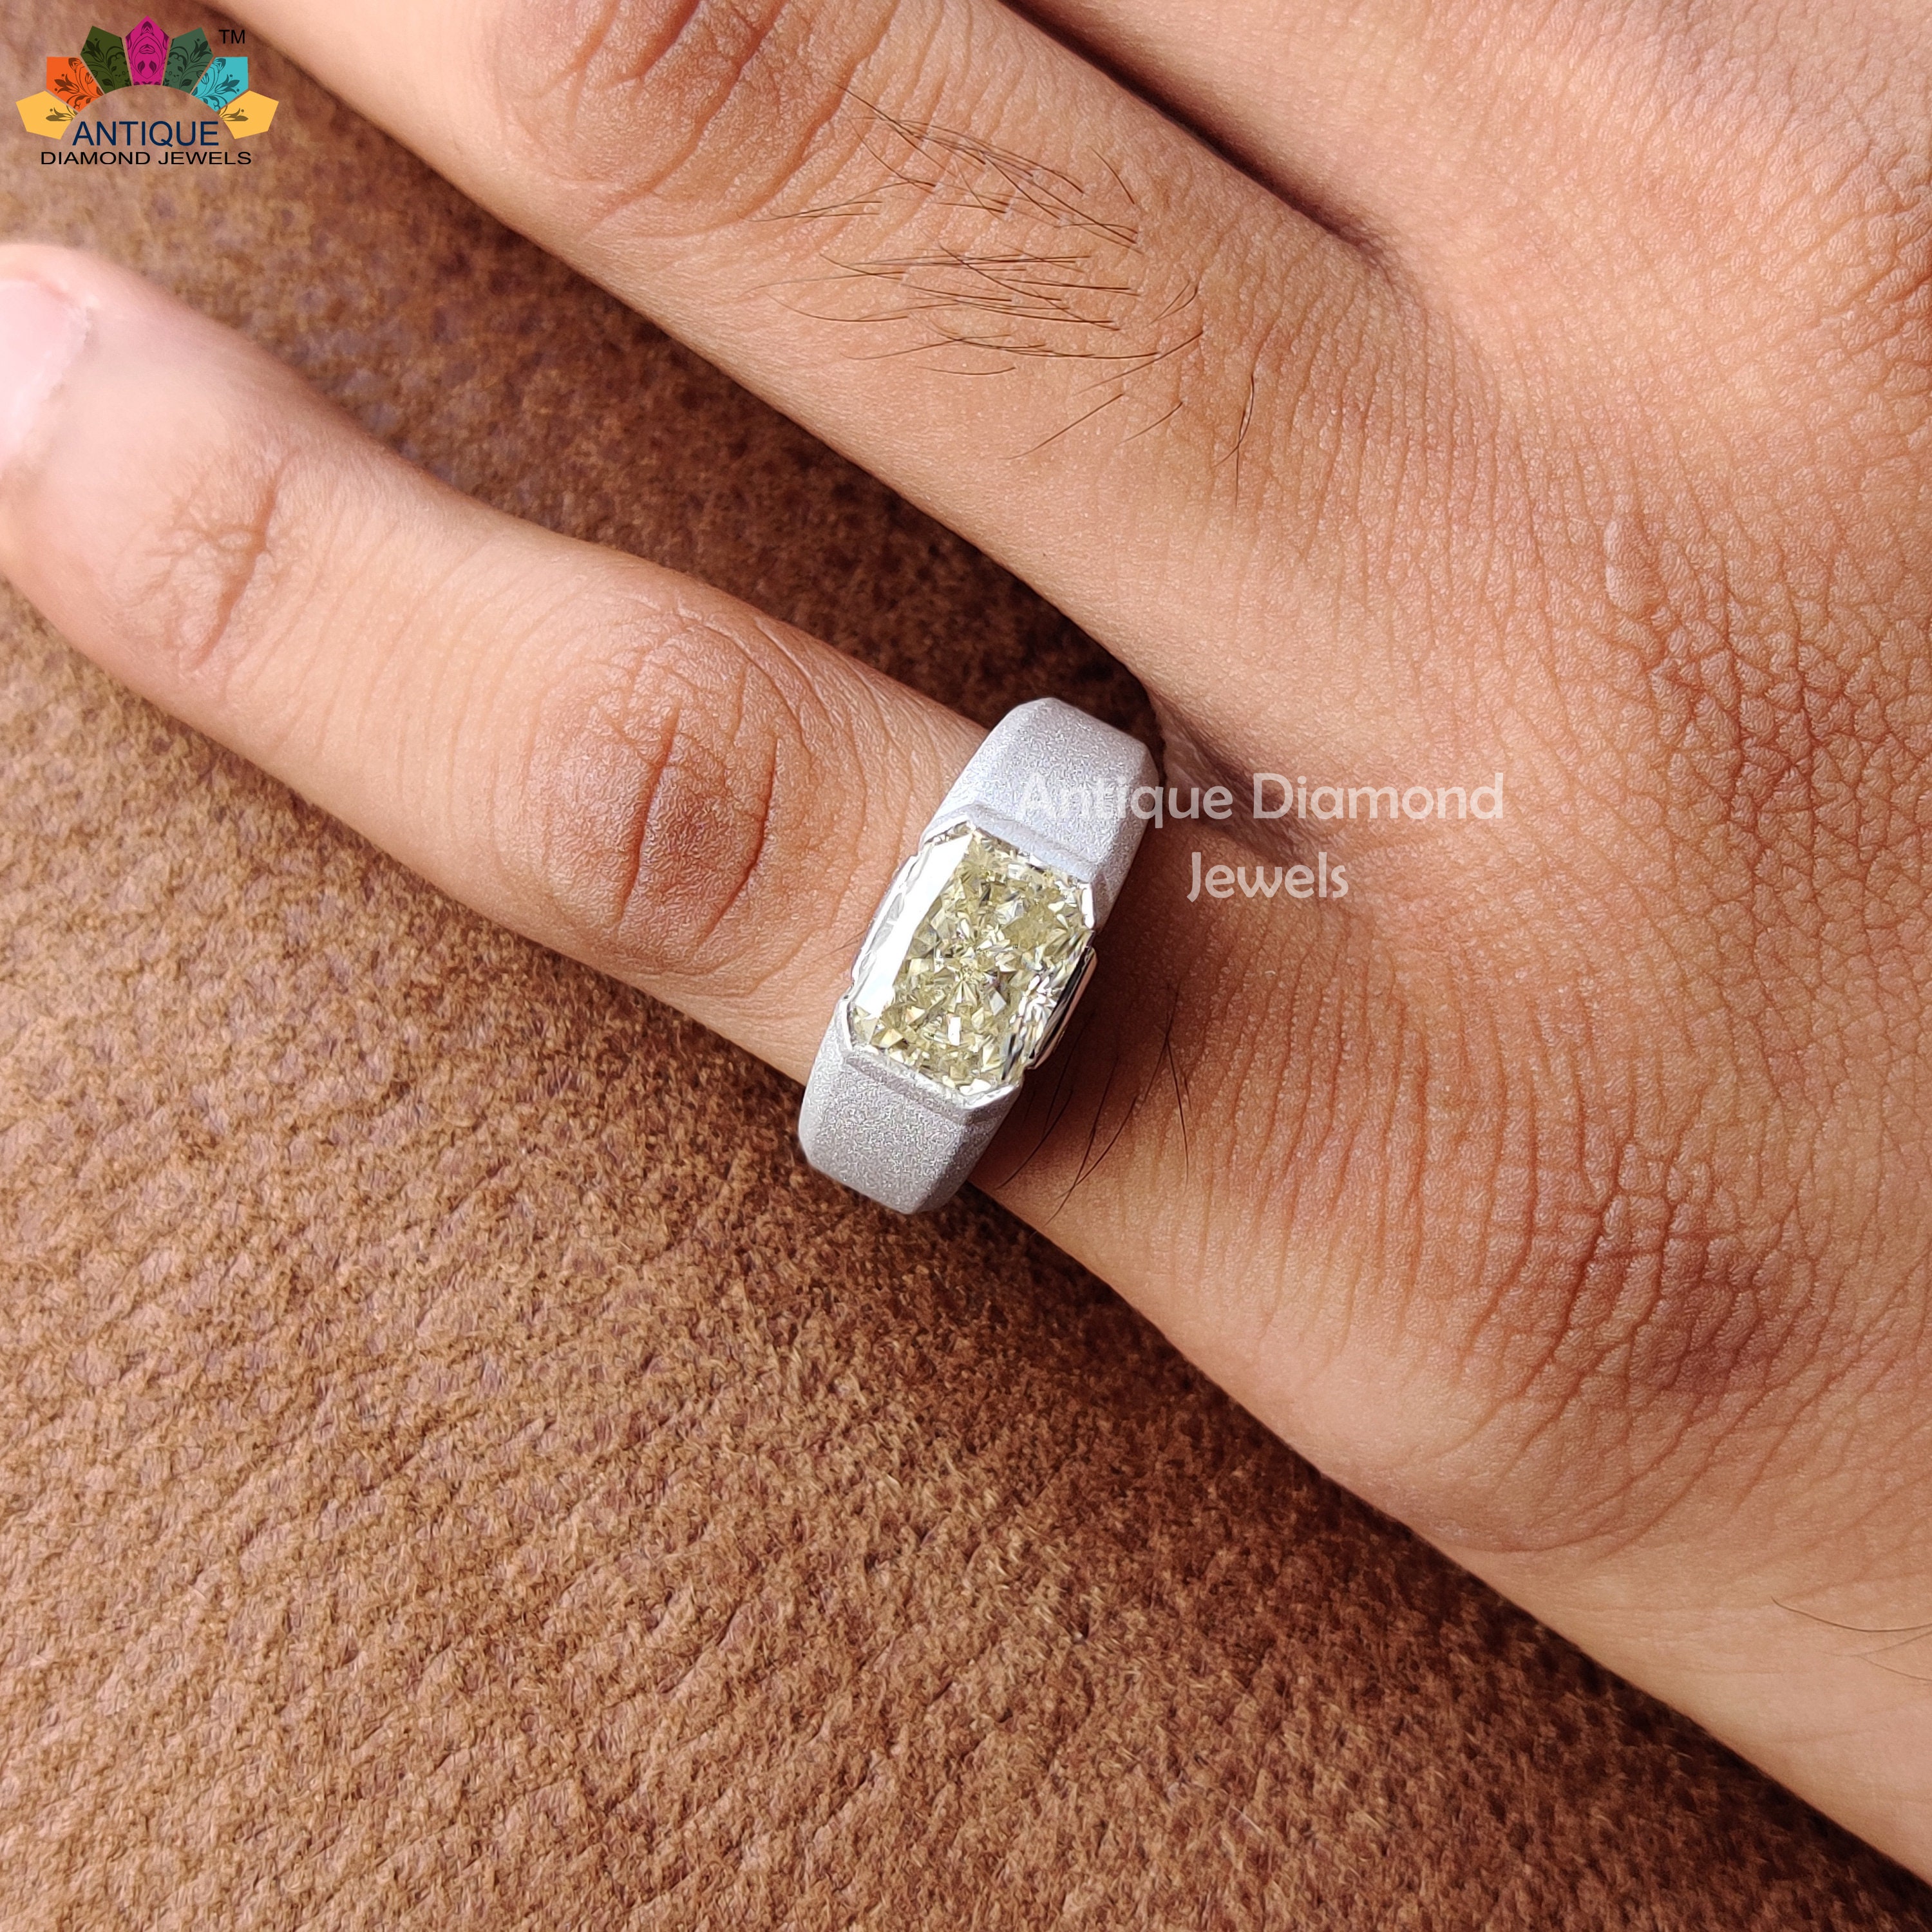 1 Gram Gold Forming Yellow Ring With Diamond Antique Design Ring For Men -  Style A985 at Rs 2750.00 | Rajkot| ID: 2849098182362